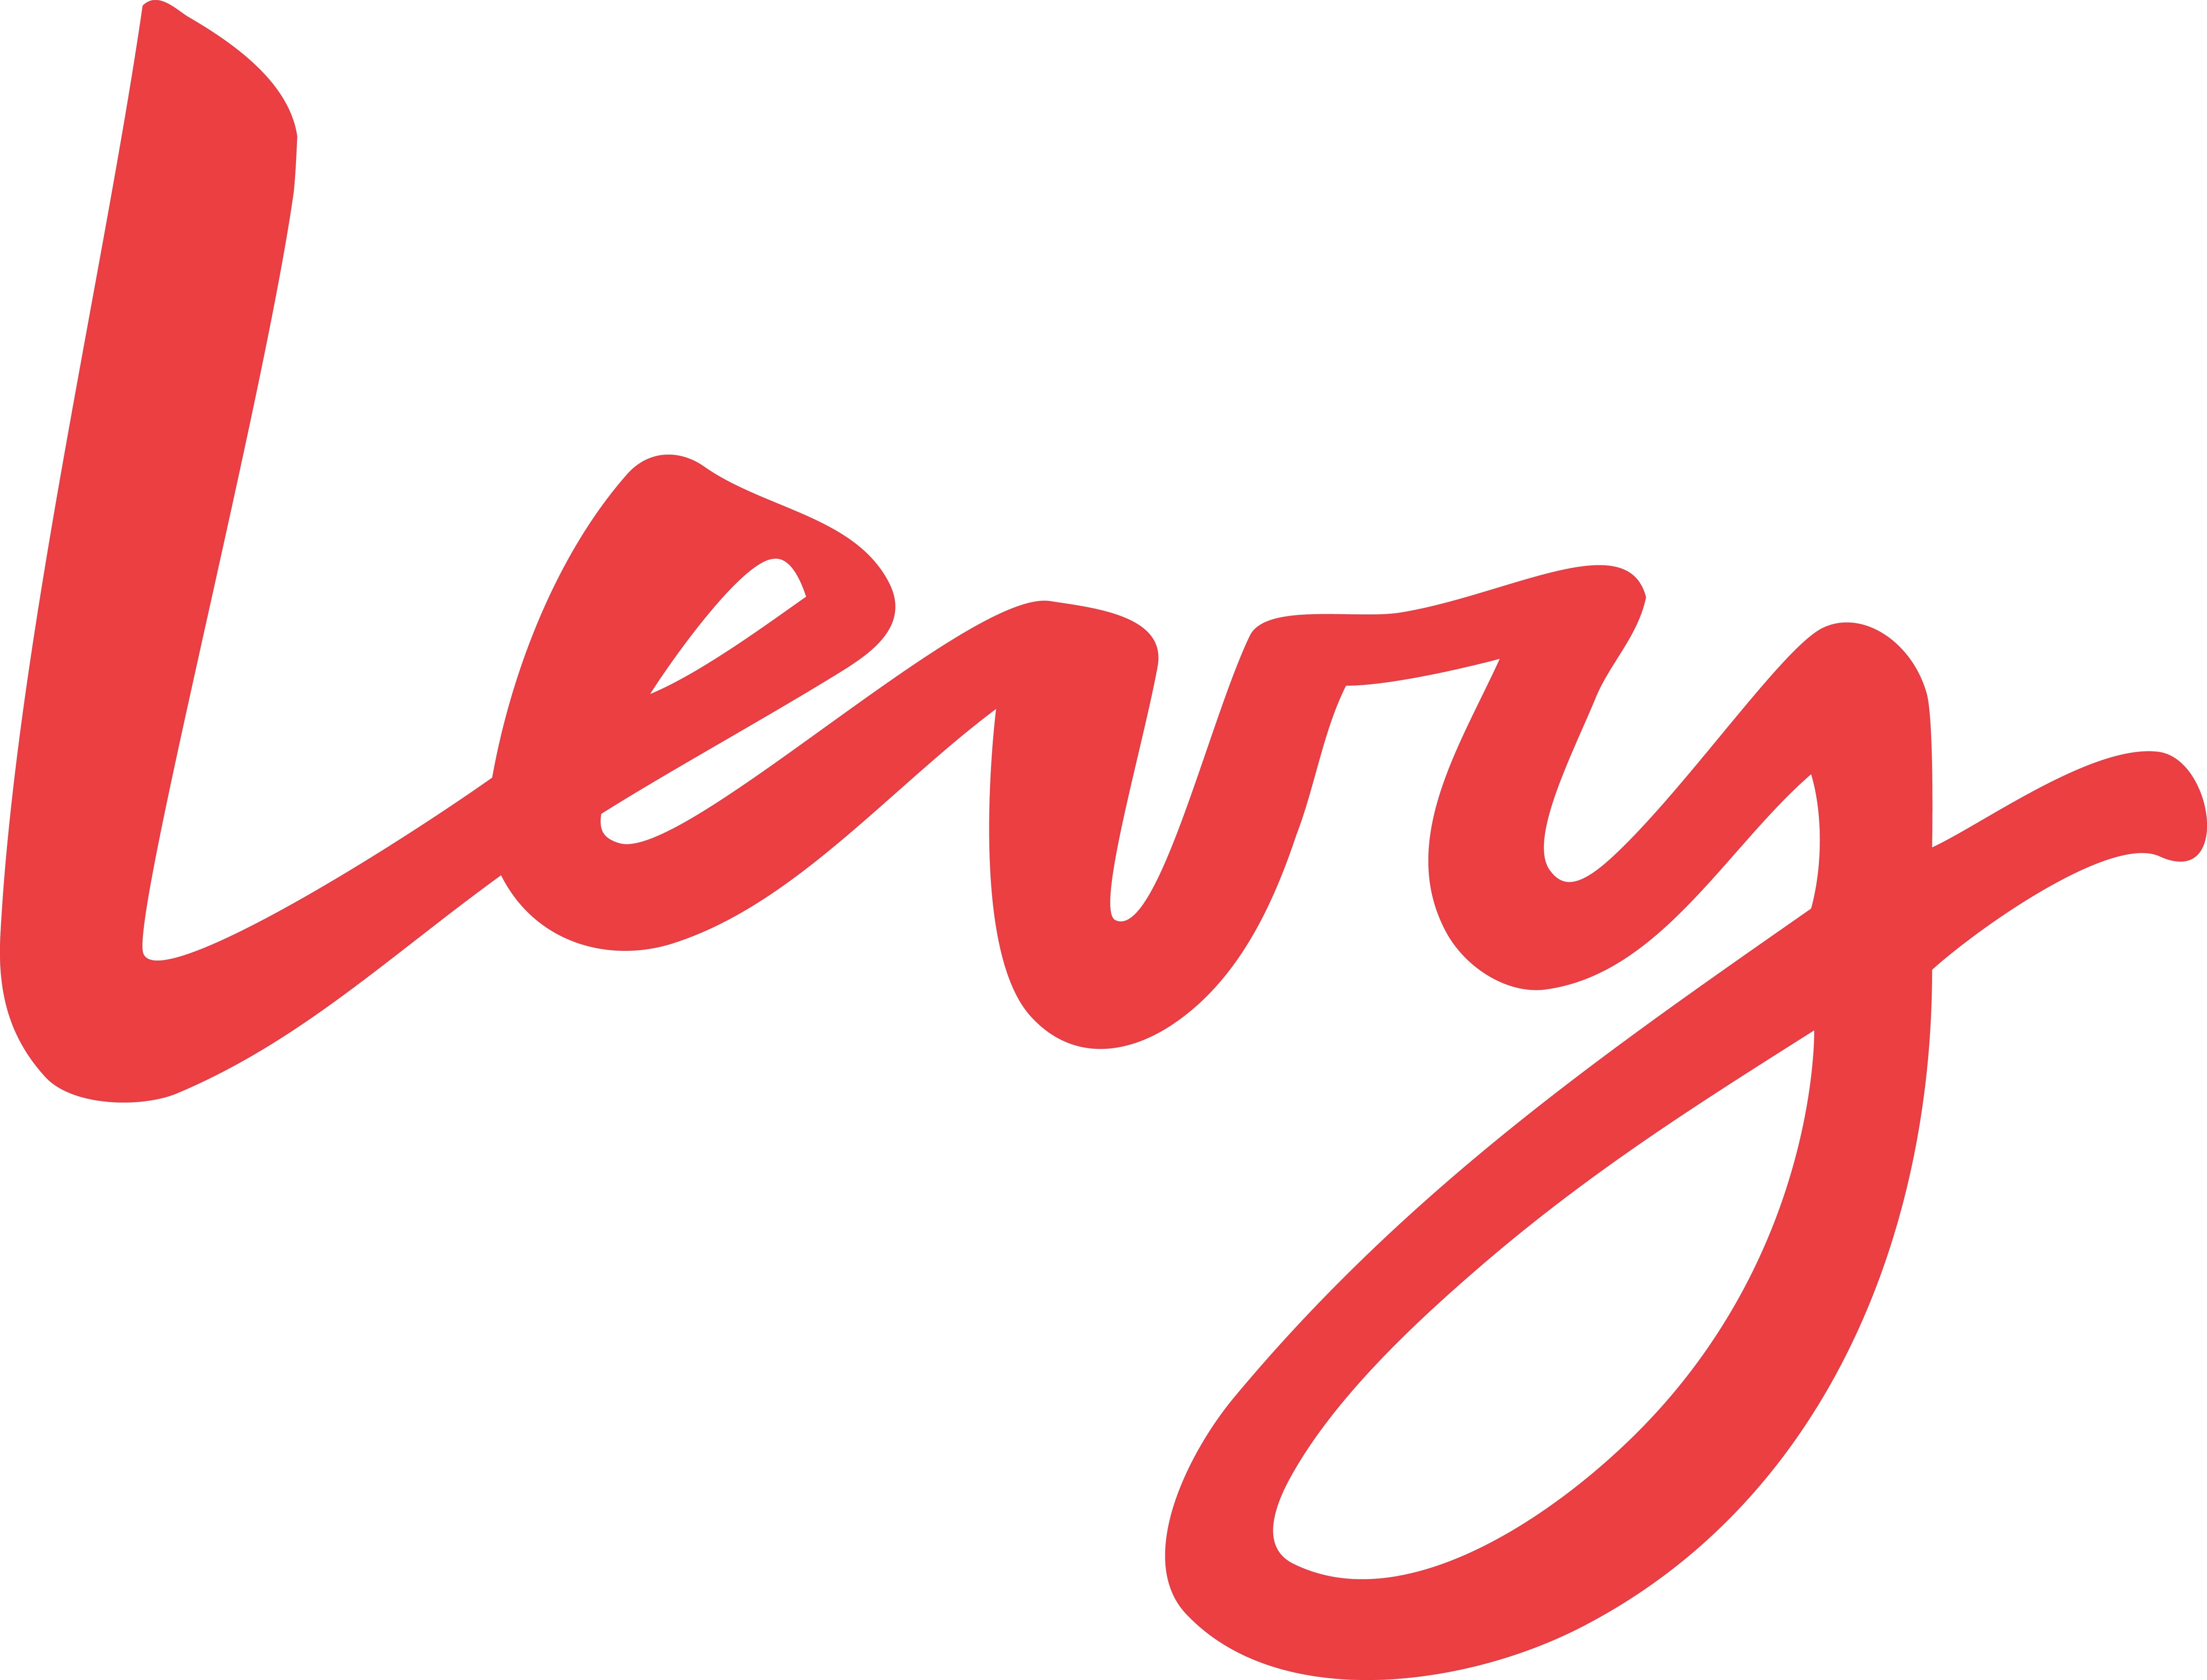 Image: Levy